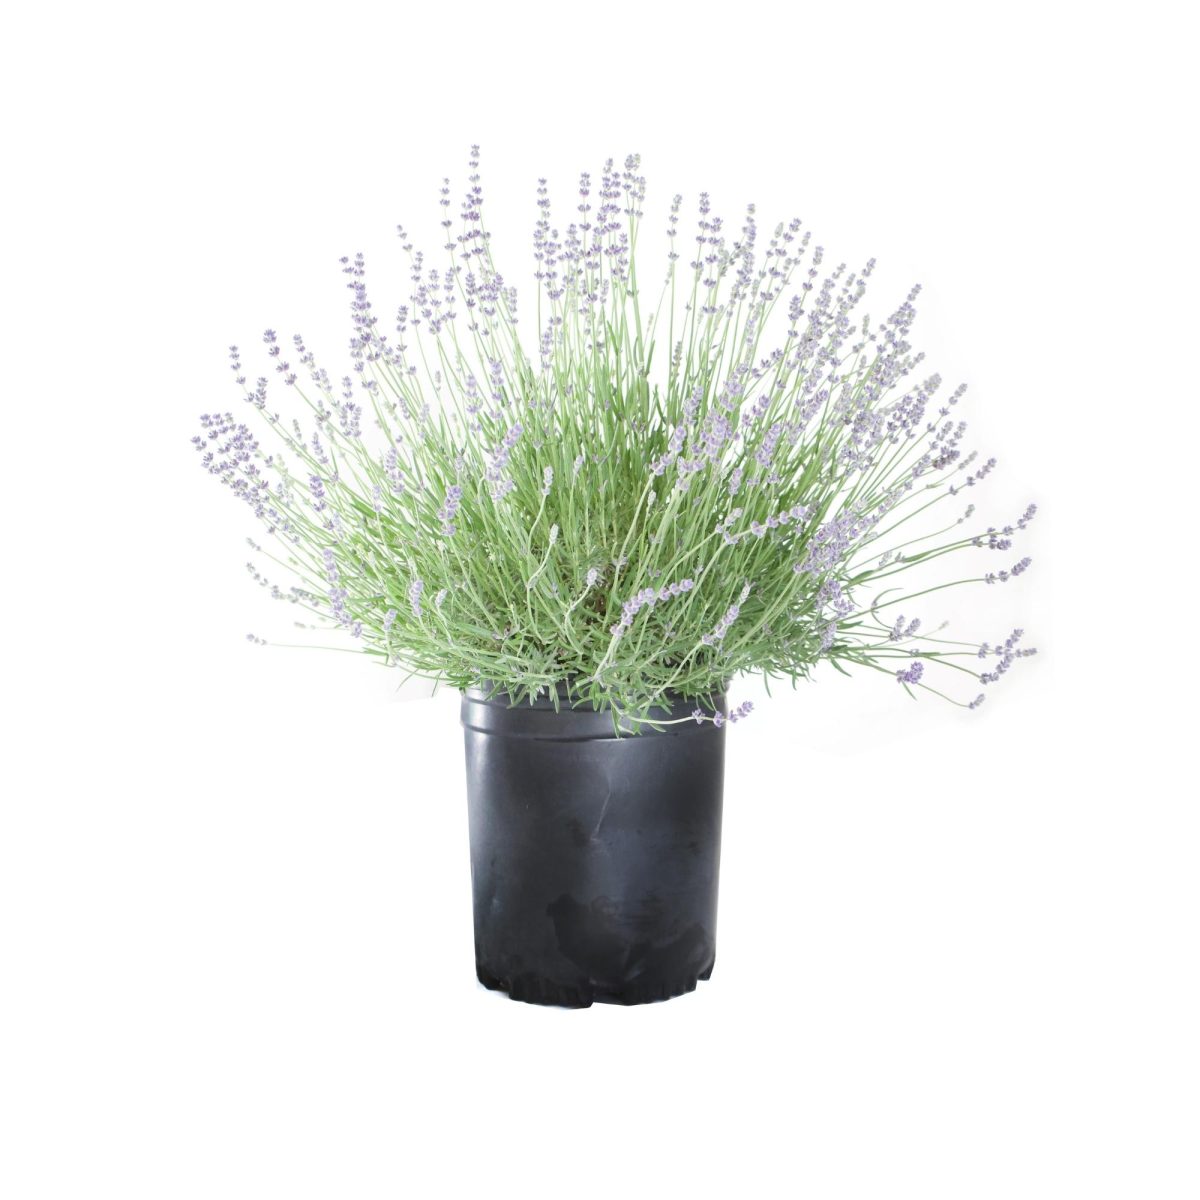 English Lavender blooming in a black nursery pot